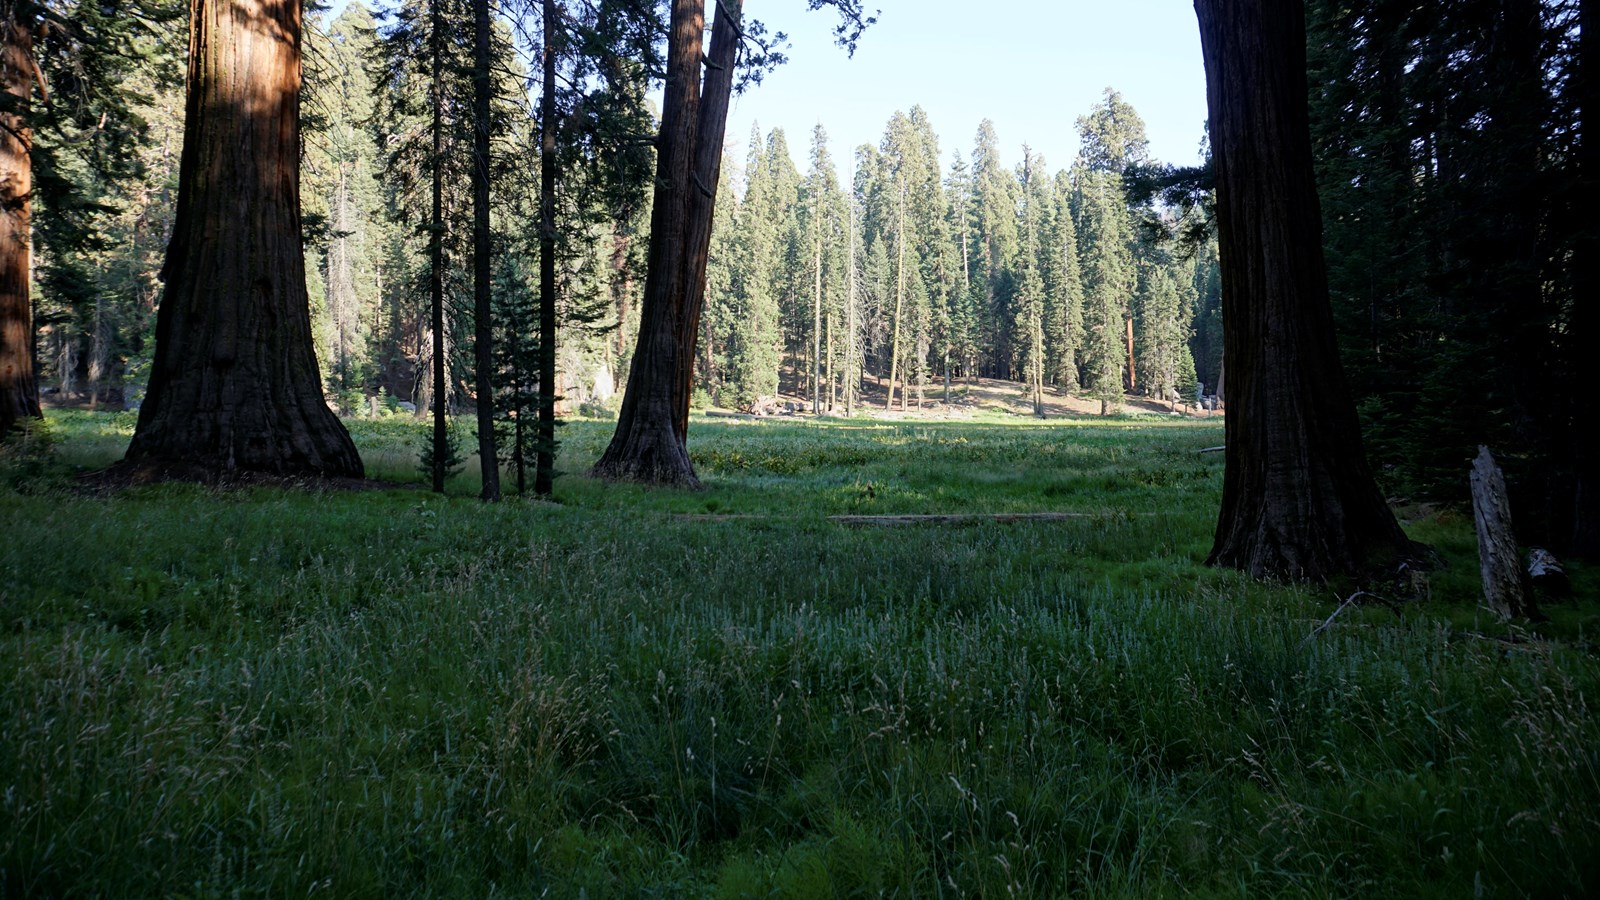 Green grass grows in a meadow between large Sequoia trees